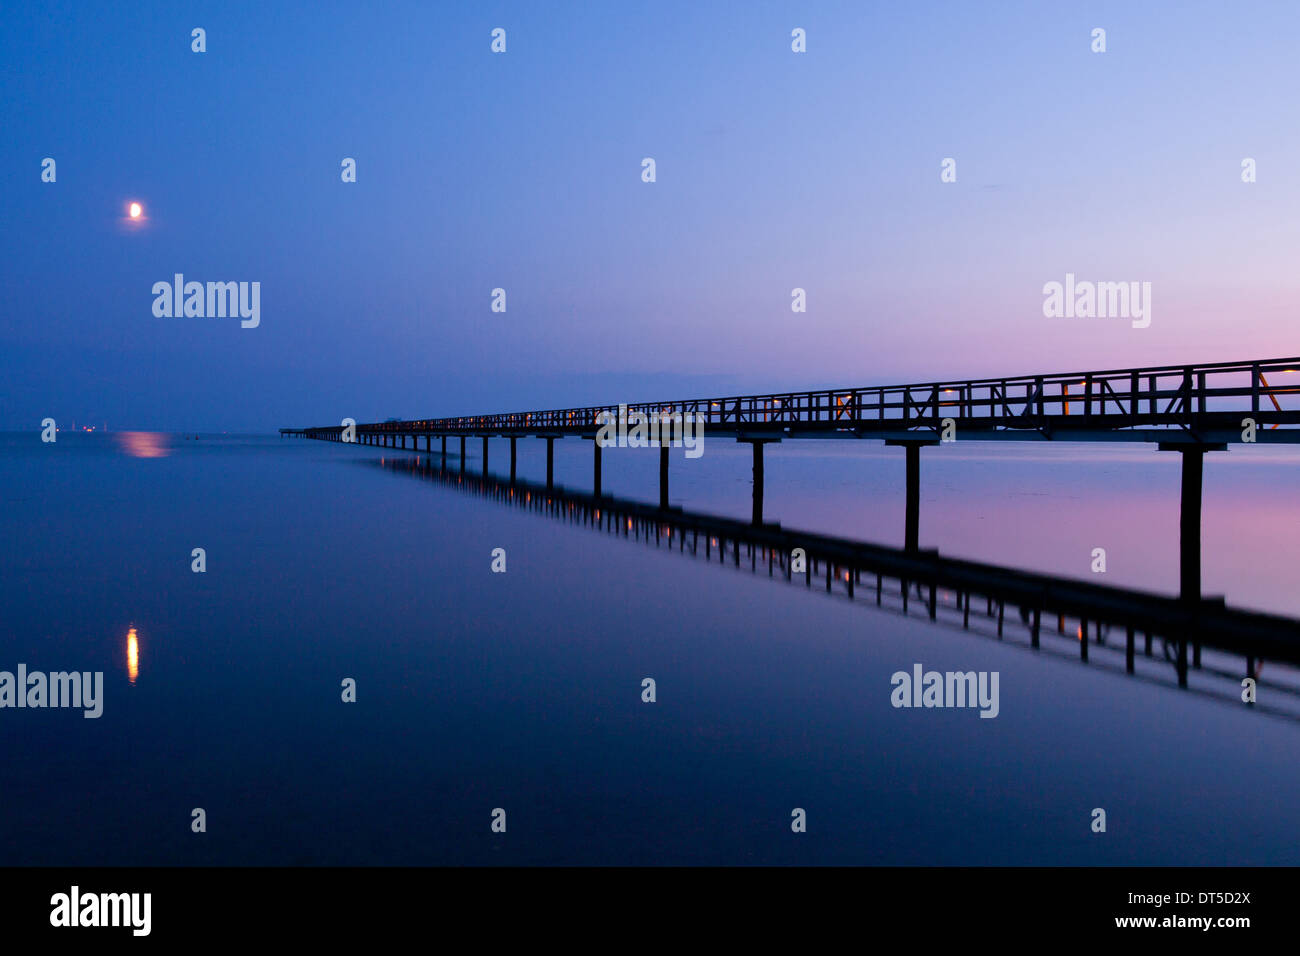 An after-sunset view of the Långa bryggan (Long Bridge), a remarkably long bathing pier in Bjärred, Sweden. Stock Photo